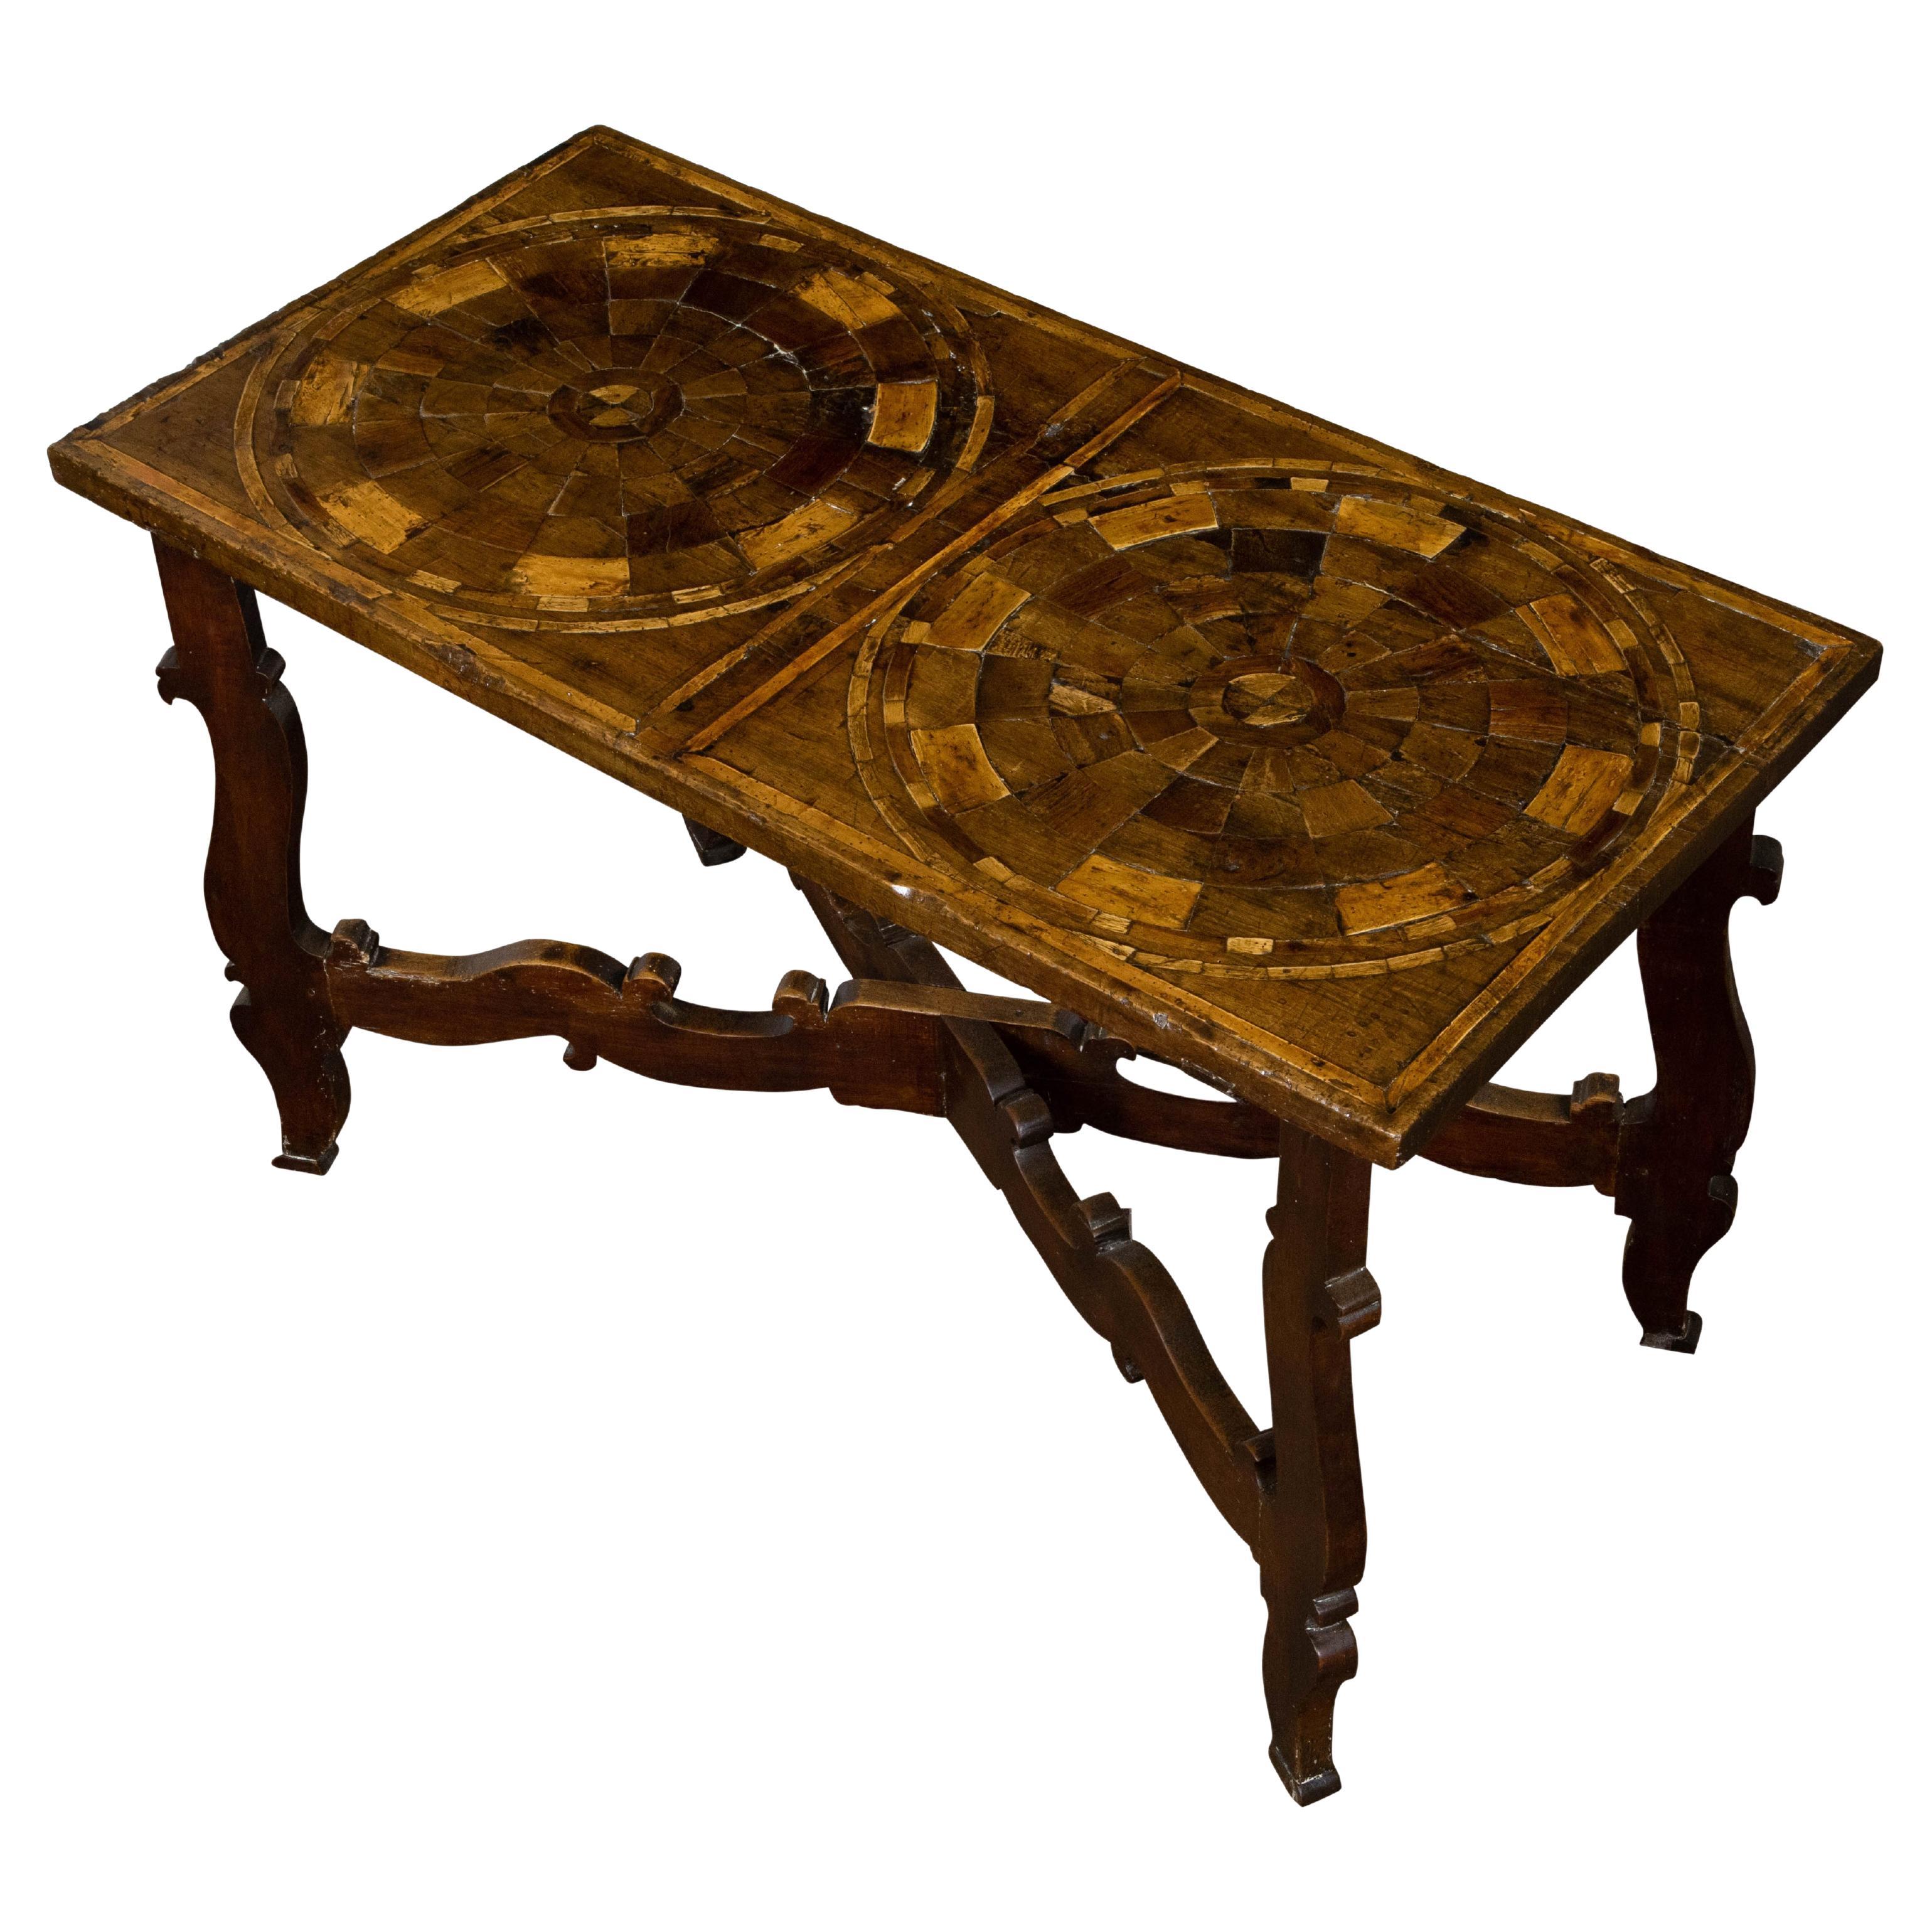 Italian 18th Century Baroque Style Carved Walnut Table with Marquetry Décor For Sale